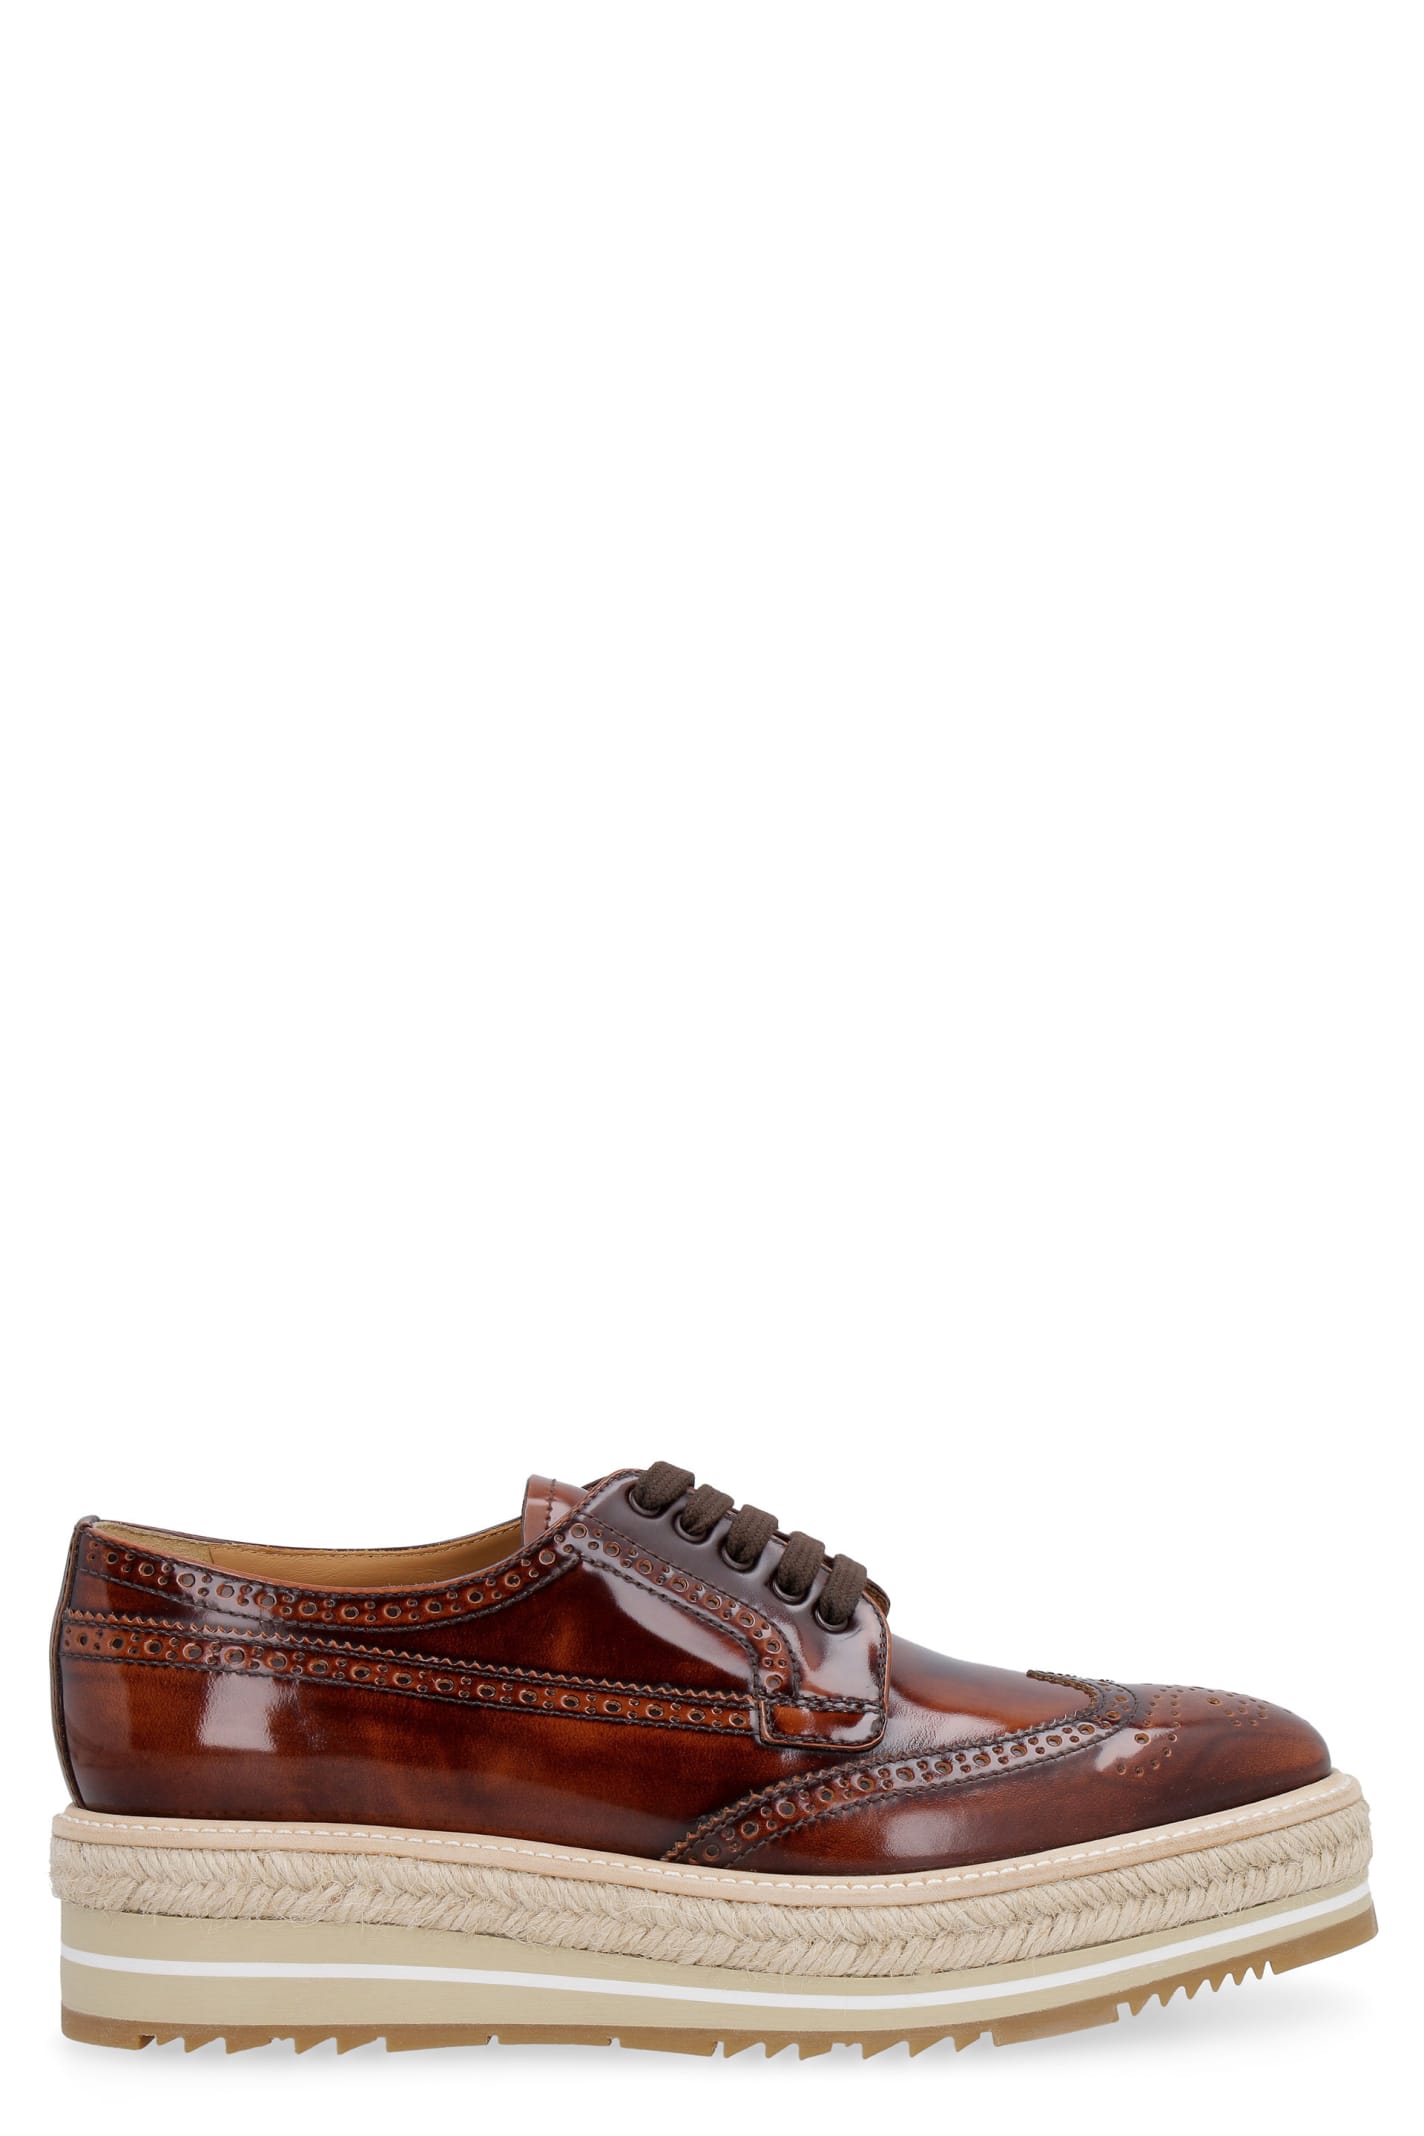 Prada Leather Brogues Lace-up Shoes